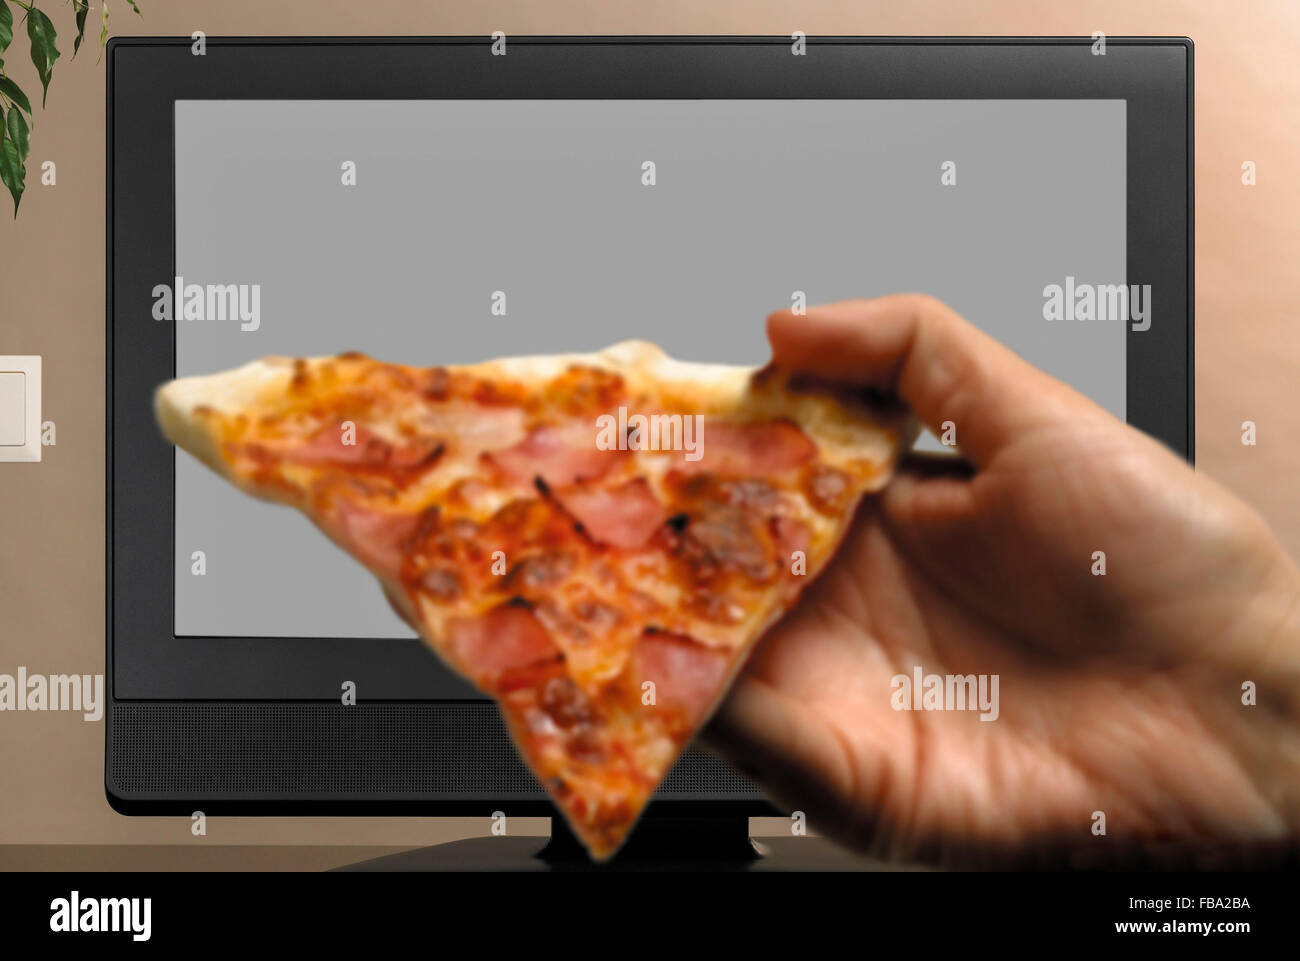 Man hand with pizza slice watching TV copy space Stock Photo